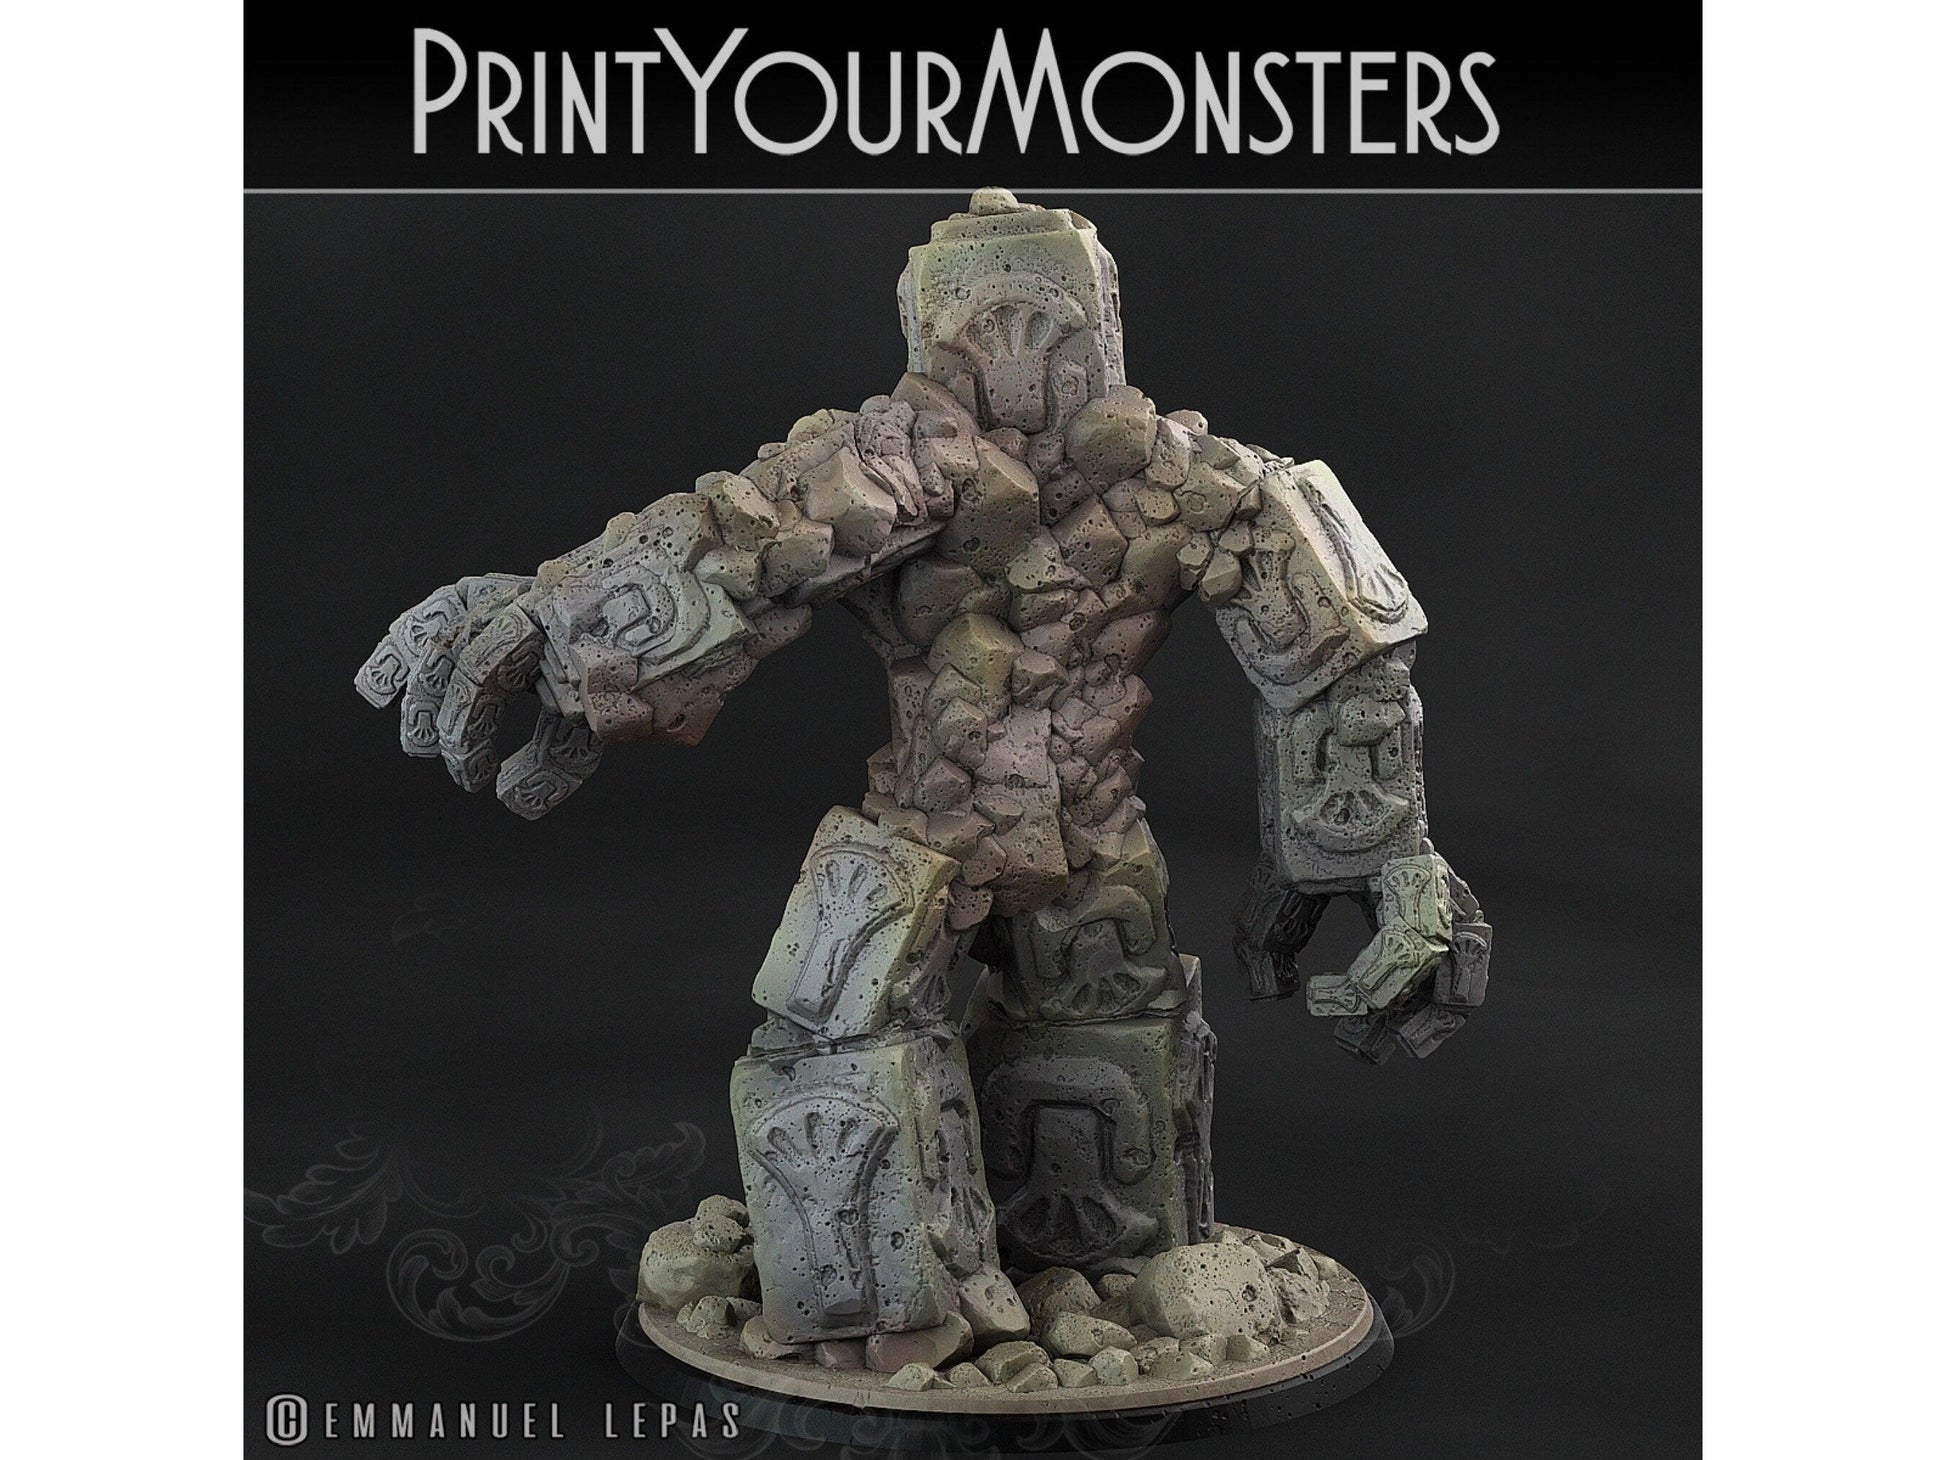 Rock Golem Miniature | Print Your Monsters | Tabletop gaming | DnD Miniature | Dungeons and Dragons, DnD 5e monster miniature - Plague Miniatures shop for DnD Miniatures